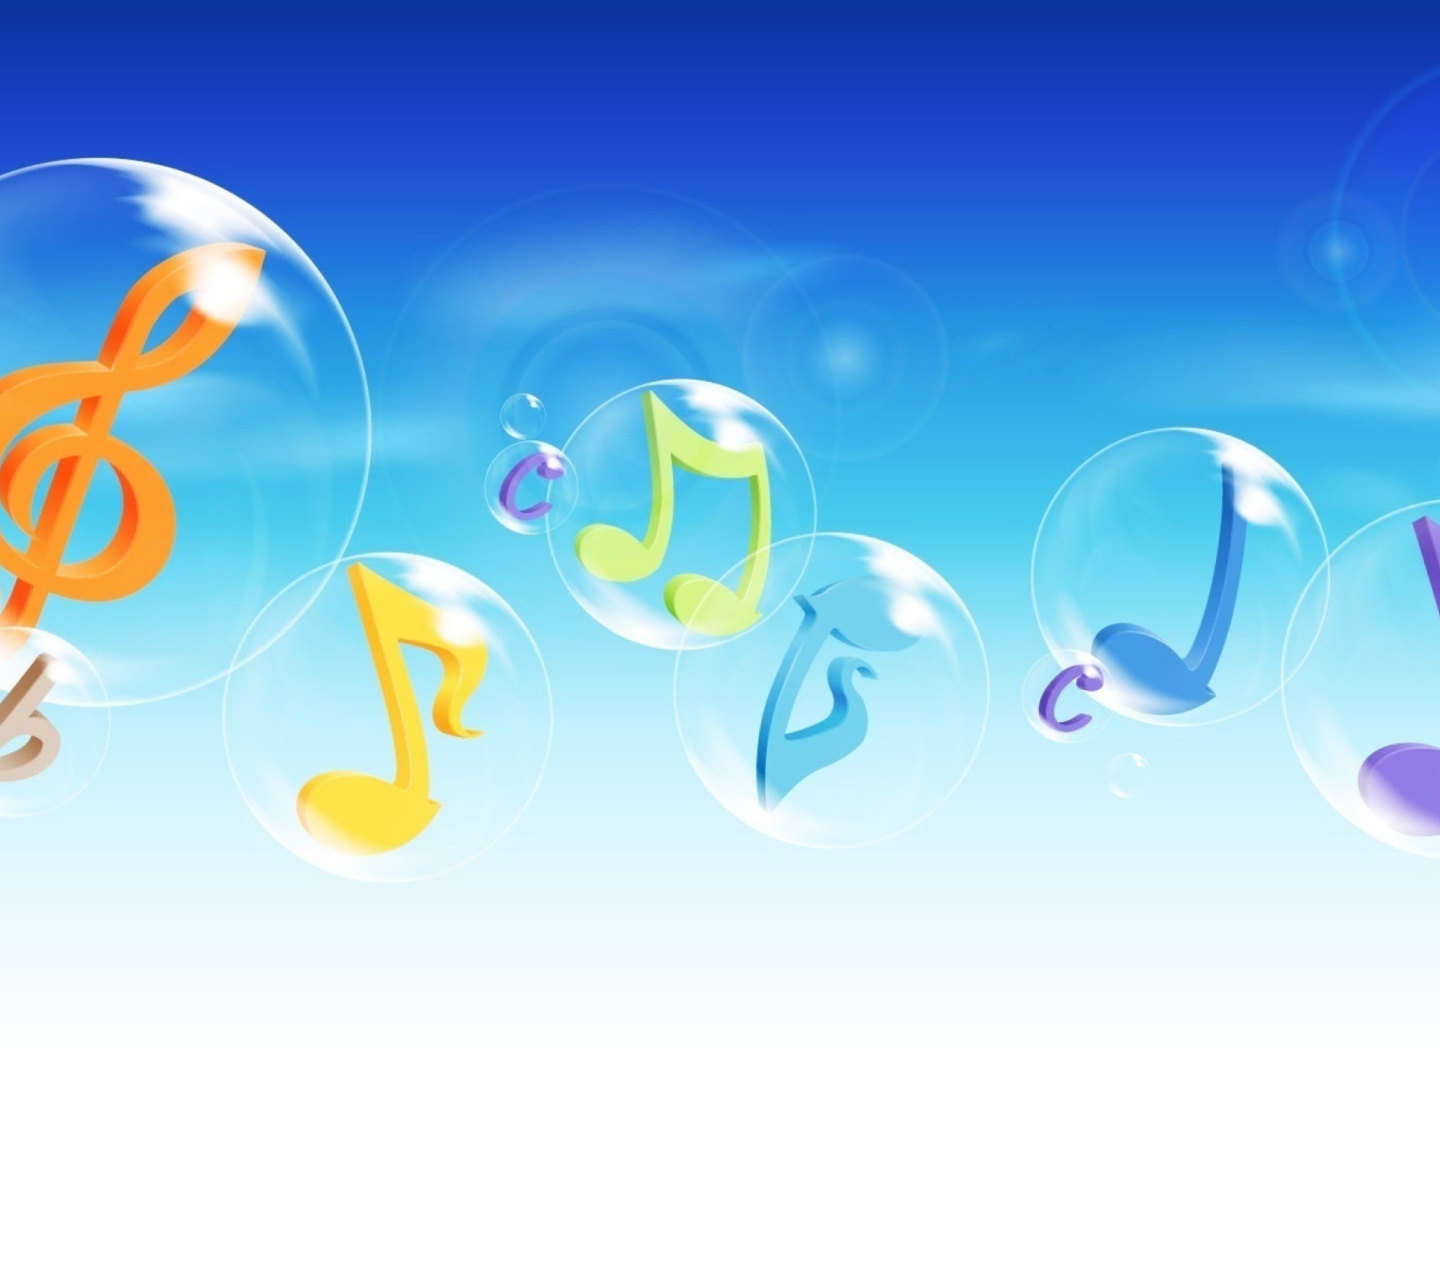 Musical Notes In Bubbles screenshot #1 1440x1280